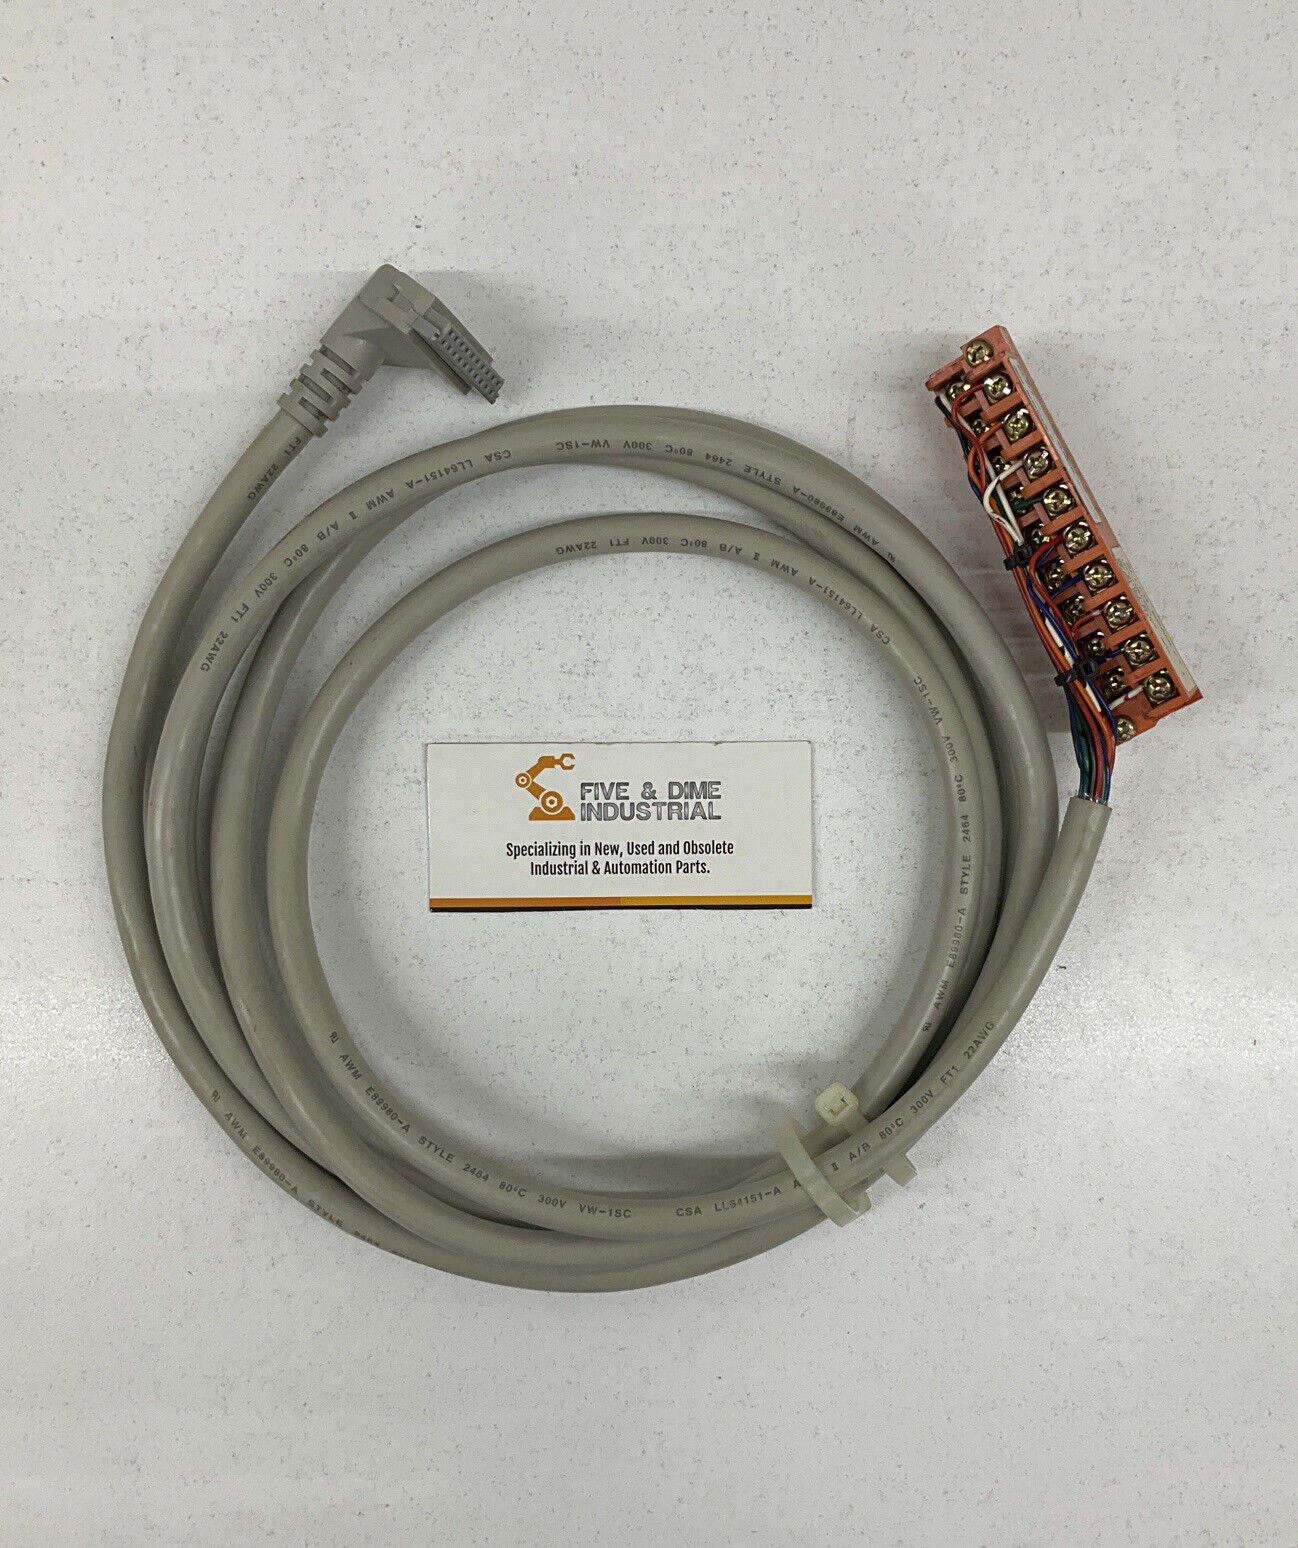 Allen Bradley 1492-CABLE025D Interface Wiring Cable 2.5M (CBL102)